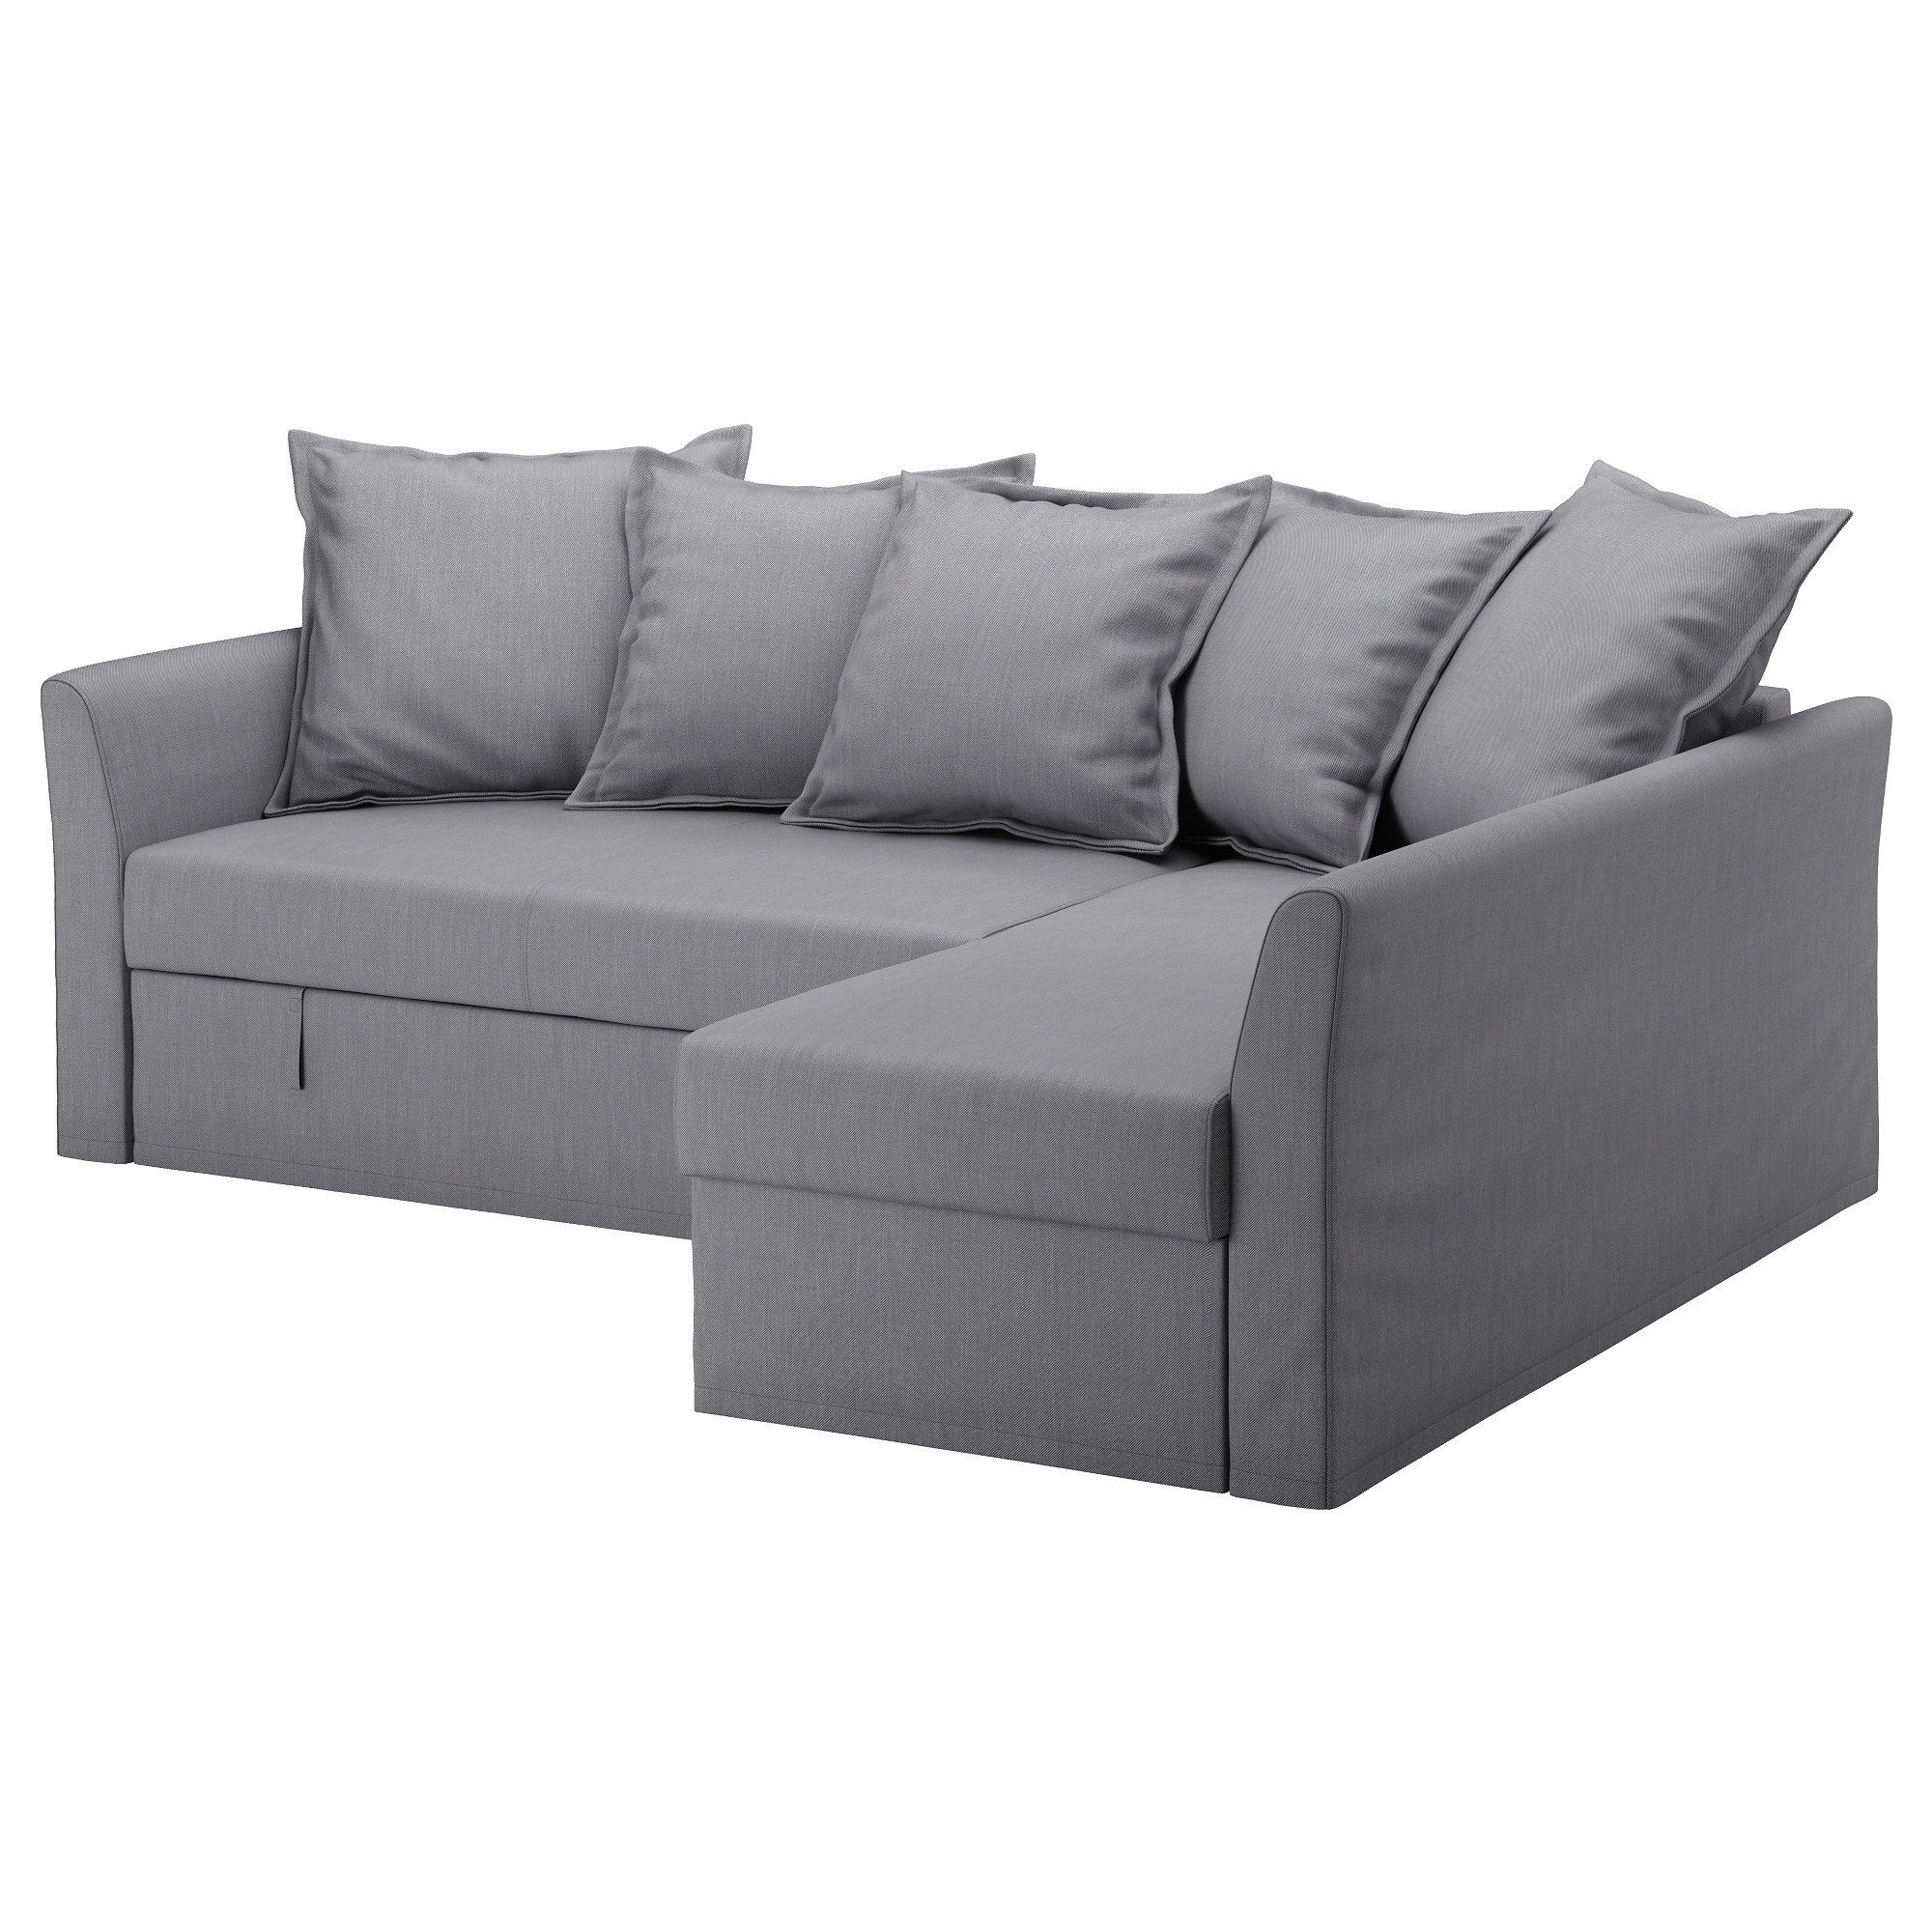 ikea holmsund sofa bed with chaise nordvalla medium gray cover made of extra durable polyester with a dense texture storage space under the chaise